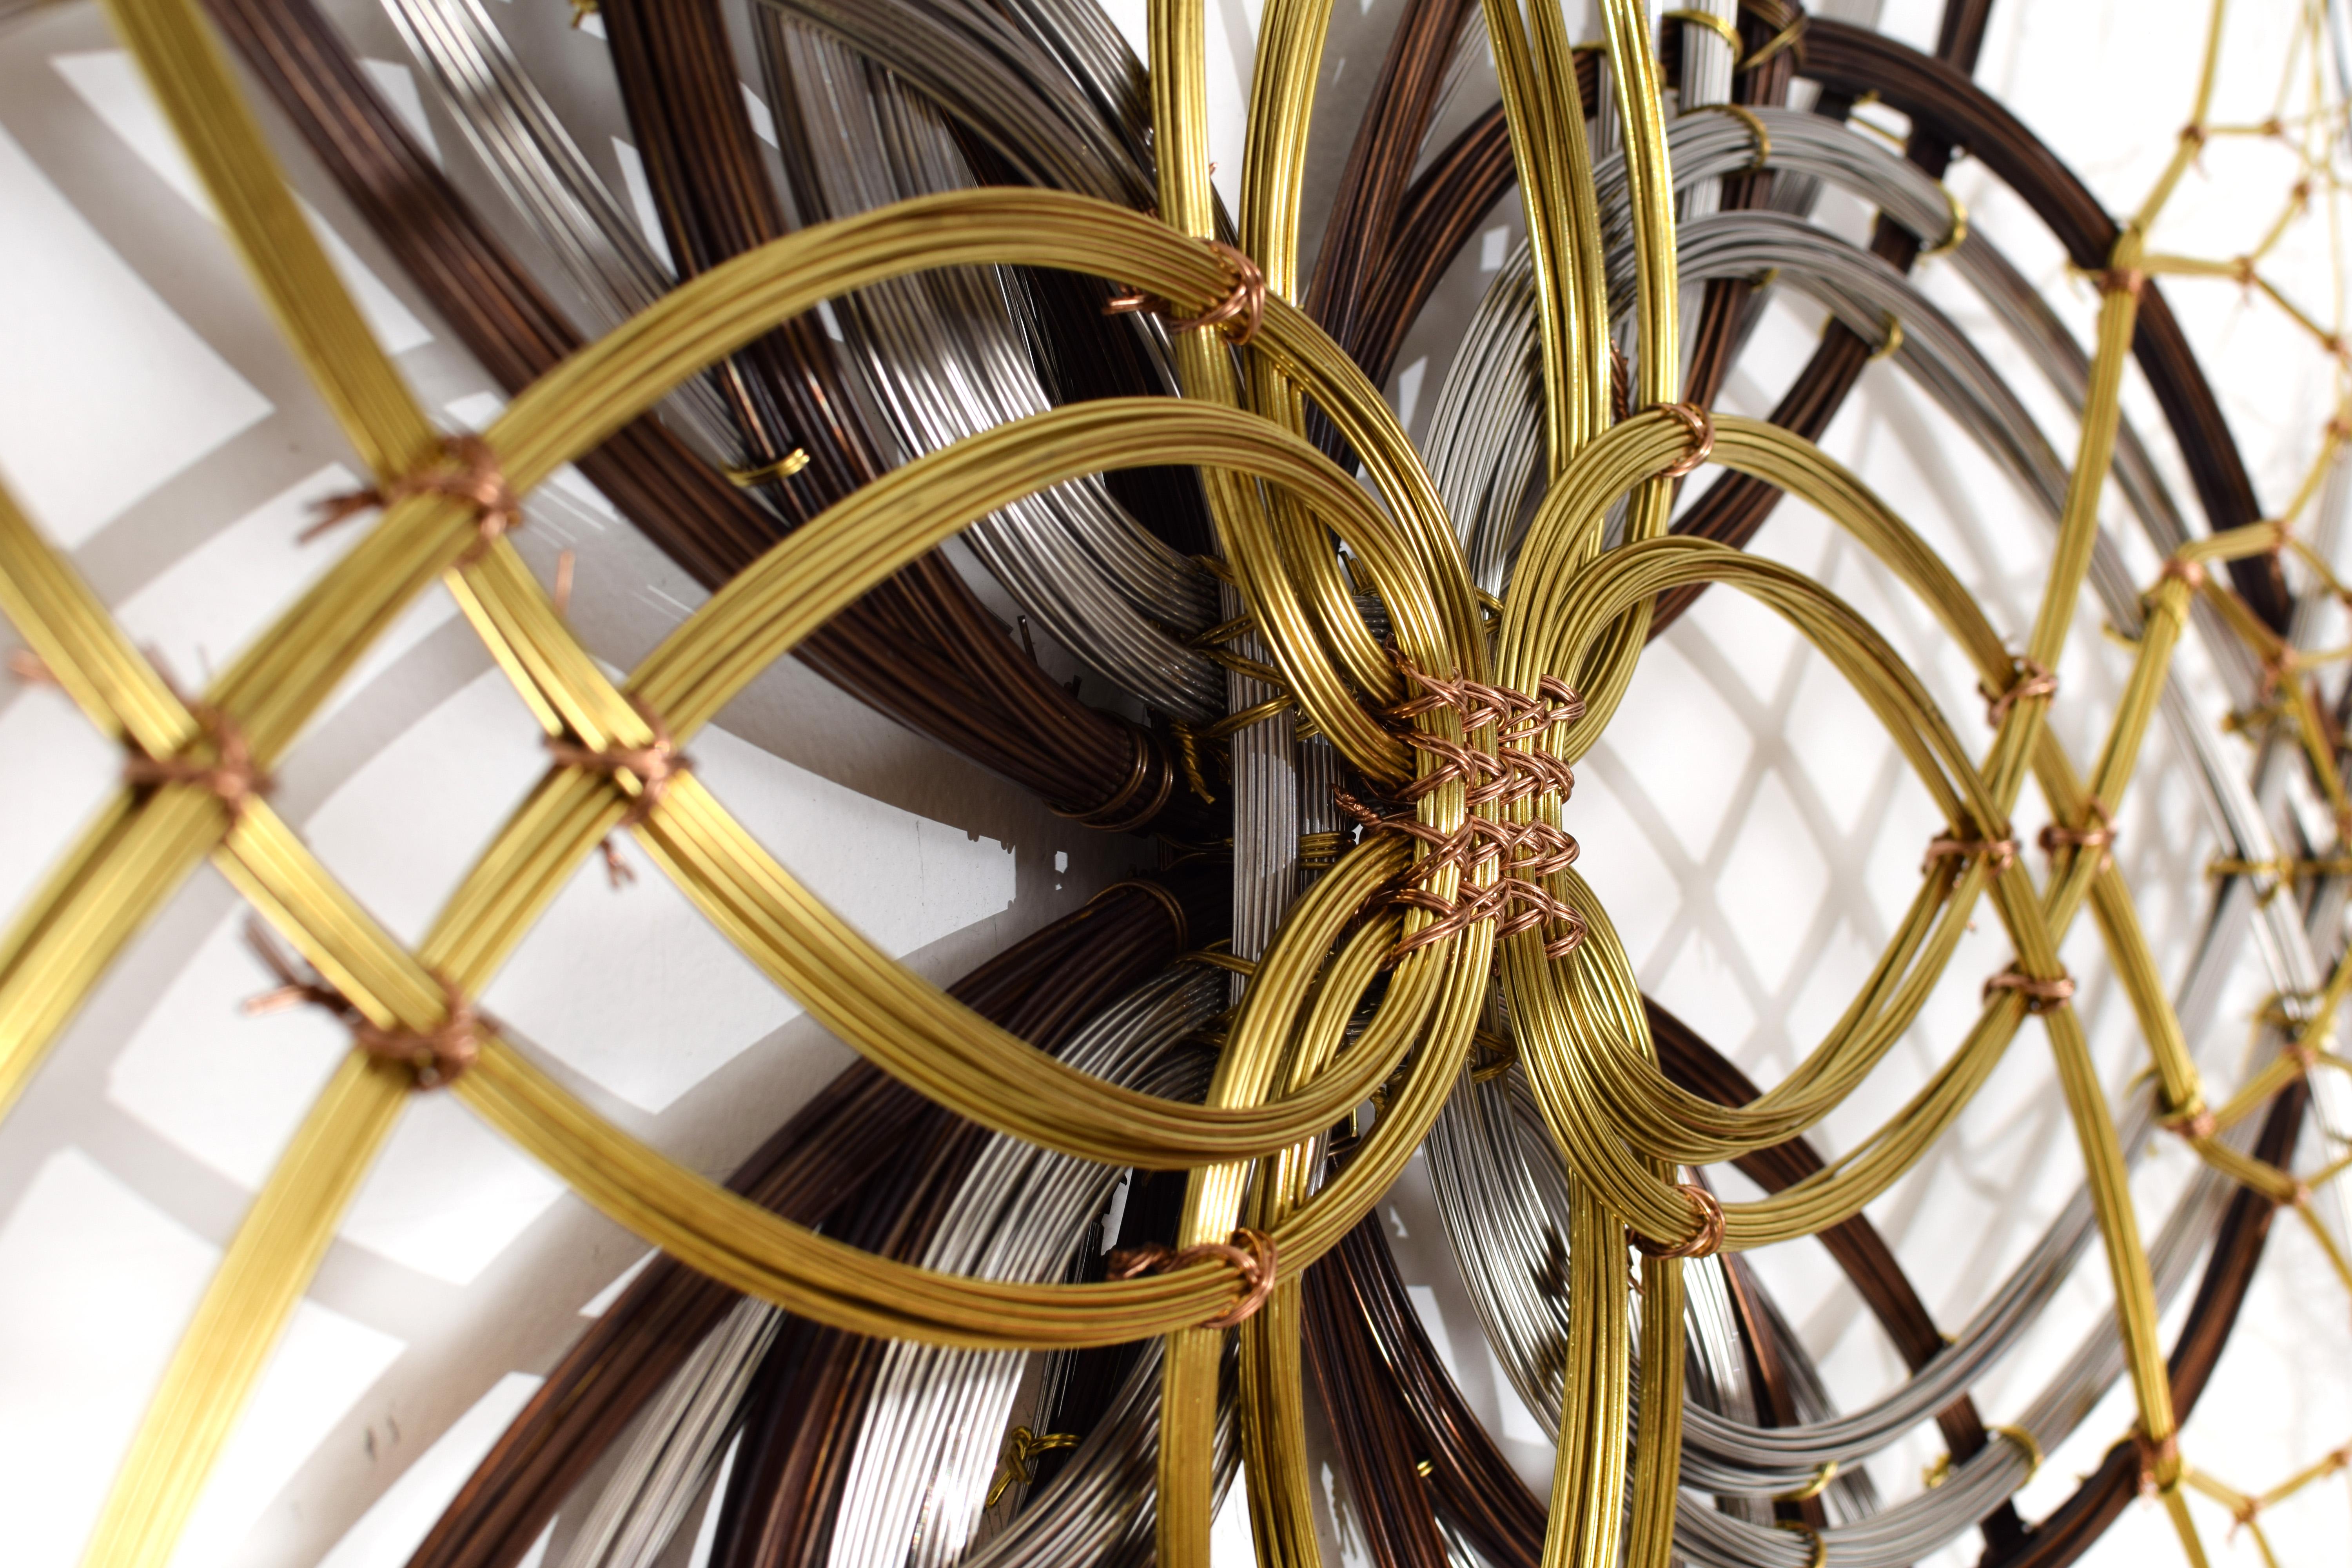 Aged bronze, brass, stainless steel. 

Kue King created this mandala inspired sculpture using bronze, brass, and stainless steel wire. The bronze is aged to give the sculpture a warmth and depth in color and display. The polished stainless steel